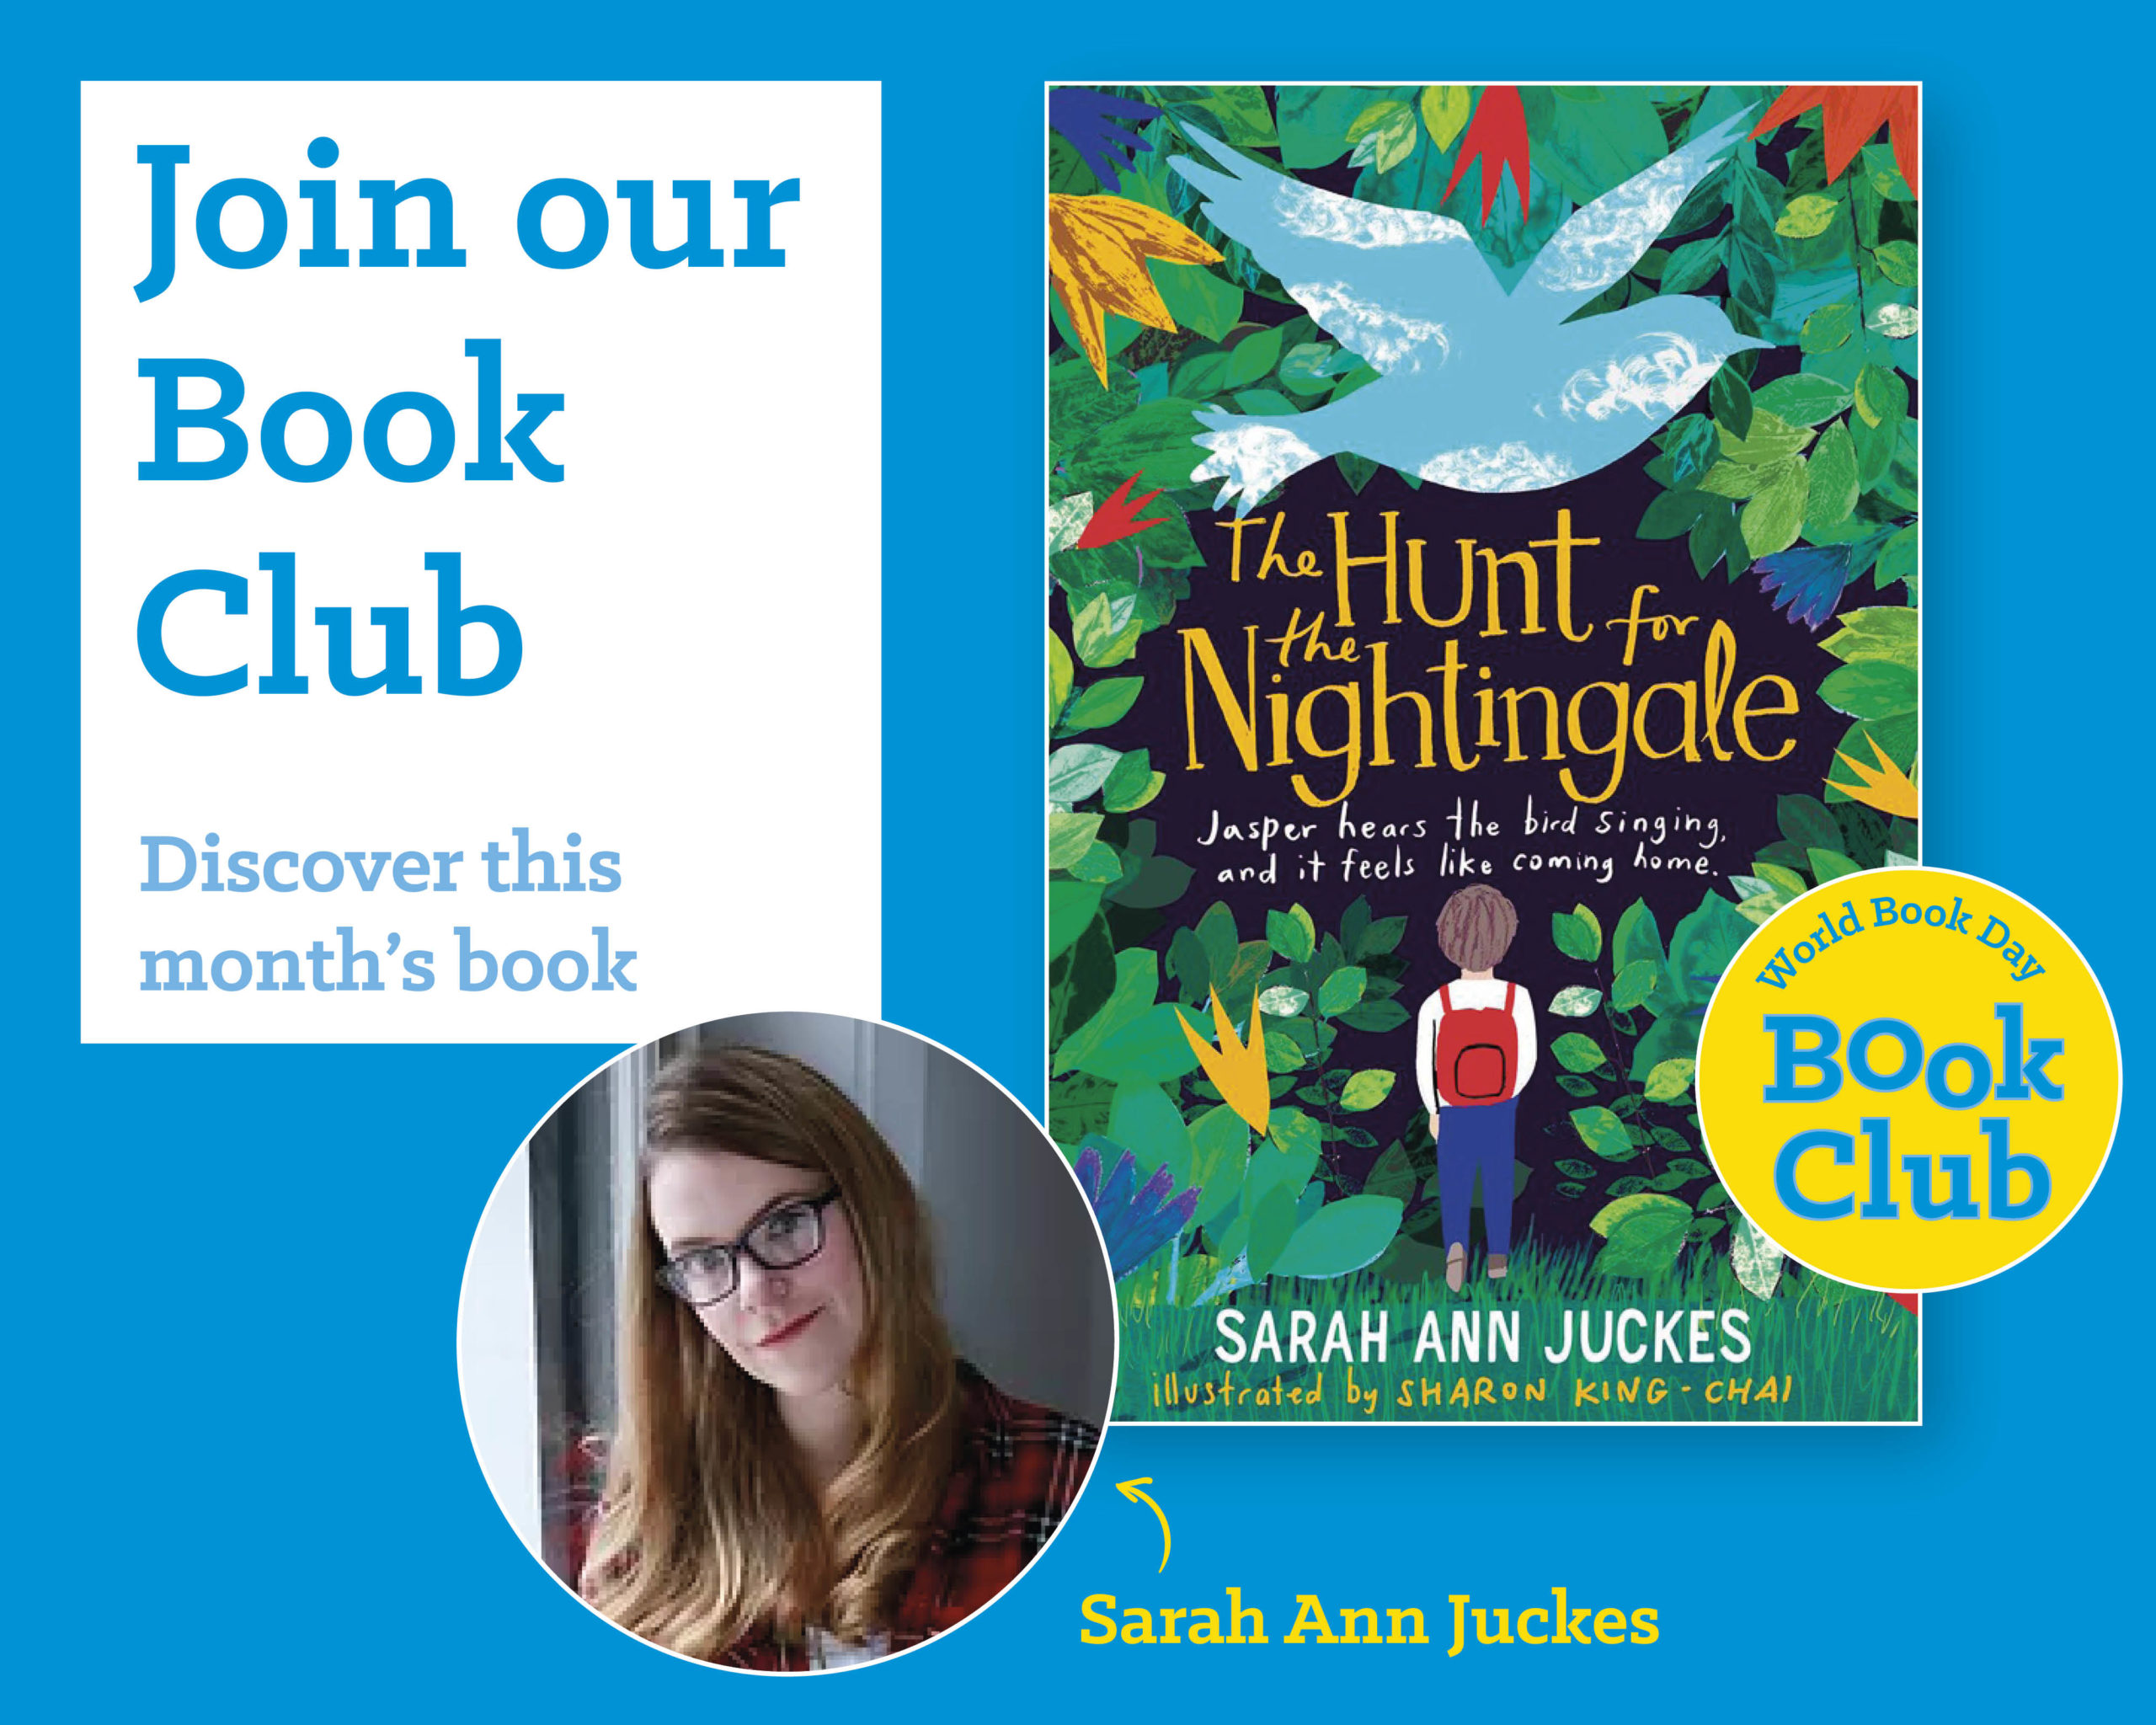 Book Club: The Hunt for the Nightingale